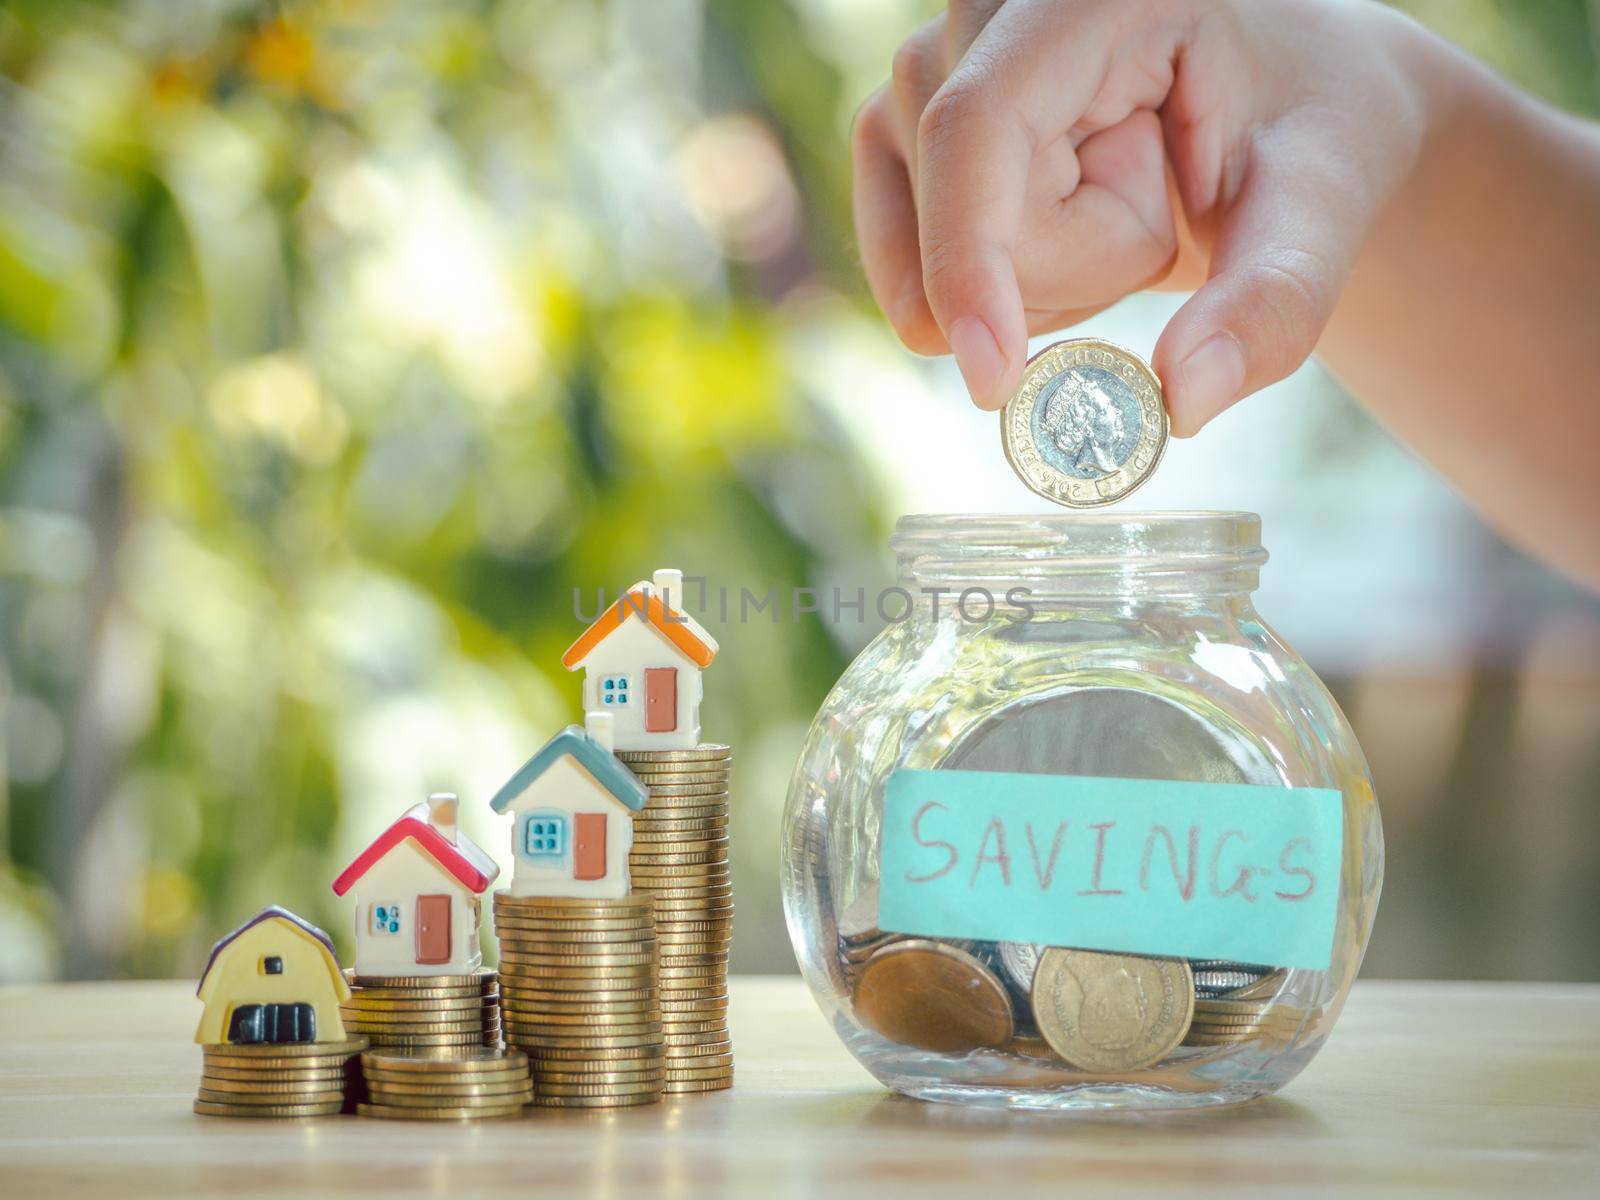 Asian boy holding coins drop a container saving money near home on gold coins stack to save money invest for future and buy home.Concept loan,property ladder,financial, real estate investment, bonus. by Chakreeyarut